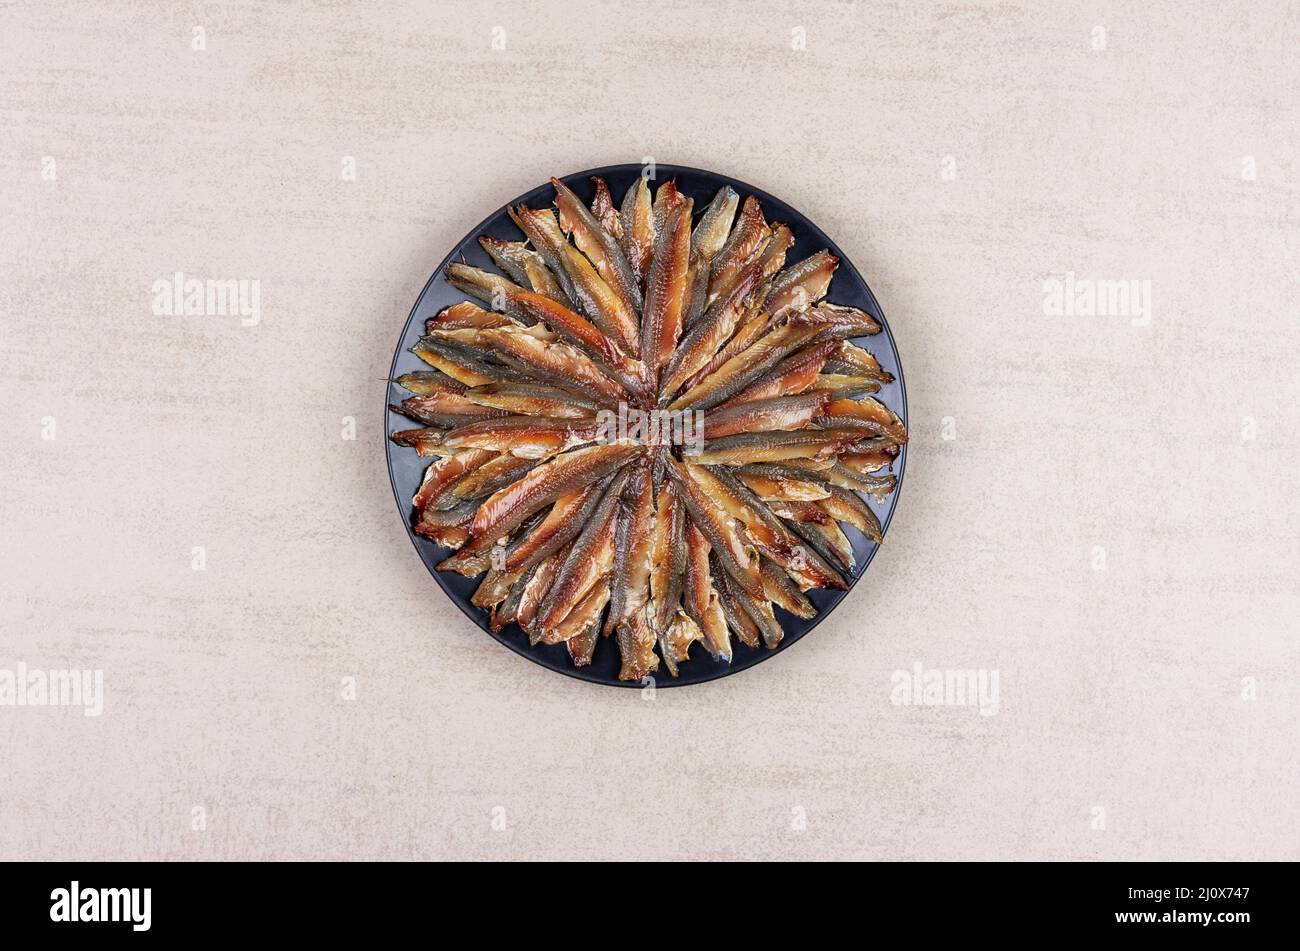 European anchovy fish fillet in a black plate on a gray background top view Stock Photo